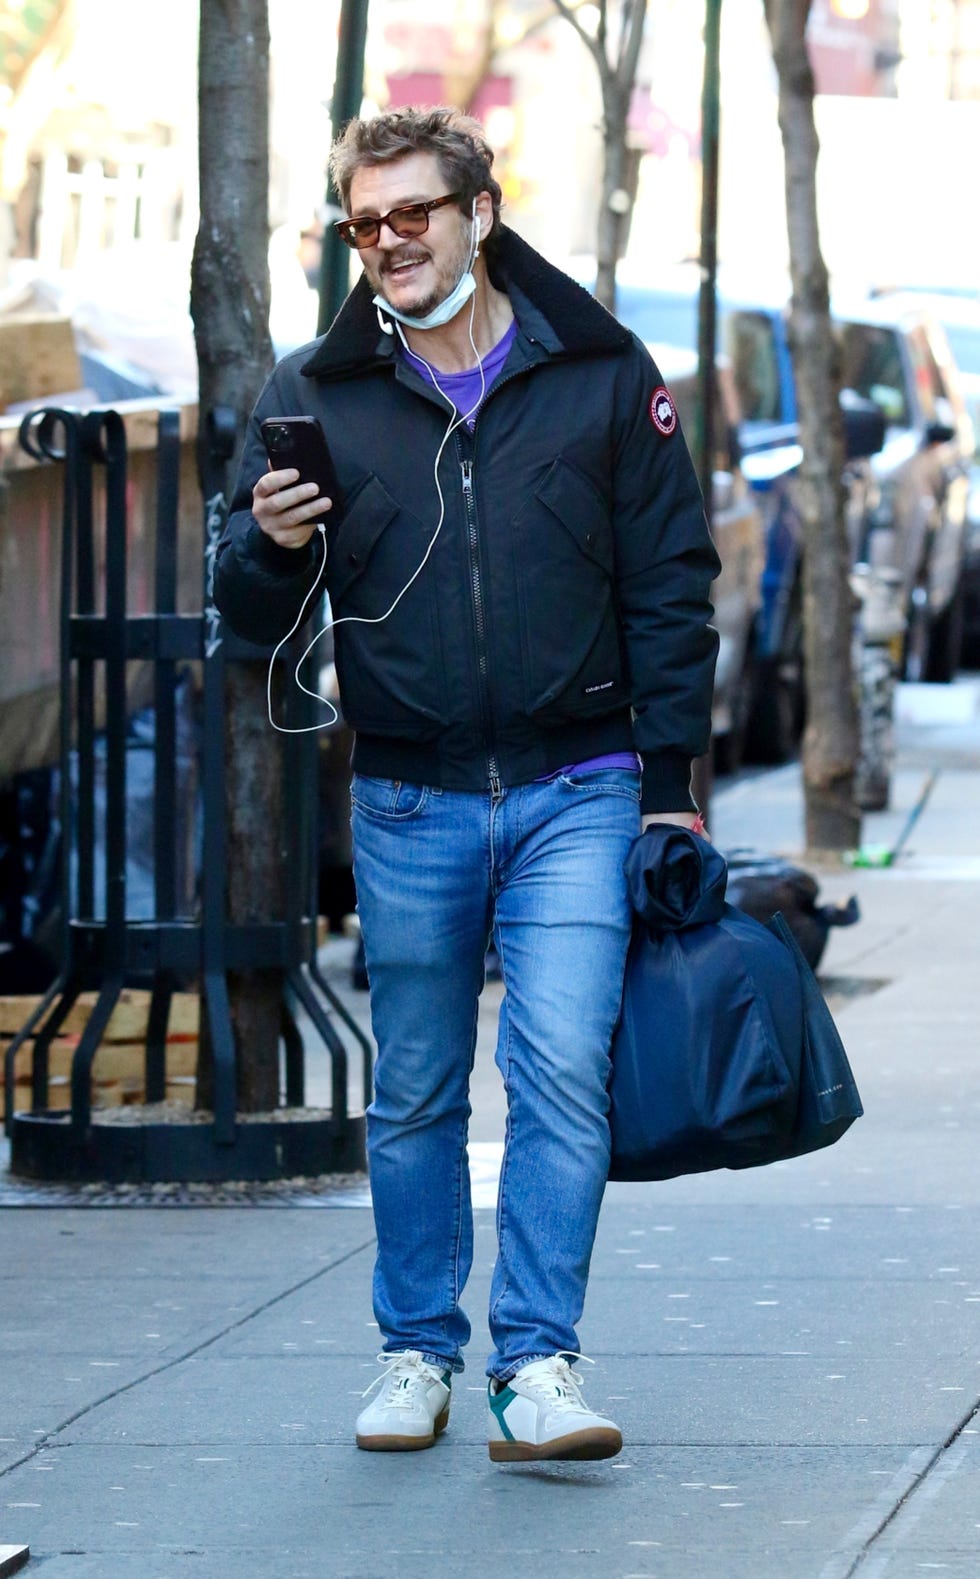 new york, ny exclusive “the mandalorian” and “the last of us” star pedro pascal is just like us as he picks up his laundry while giving the peace sign in manhattan’s east village neighborhoodpictured pedro pascalbackgrid usa 11 february 2023 byline must read brosnyc backgridusa 1 310 798 9111 usasalesbackgridcomuk 44 208 344 2007 uksalesbackgridcomuk clients pictures containing childrenplease pixelate face prior to publication